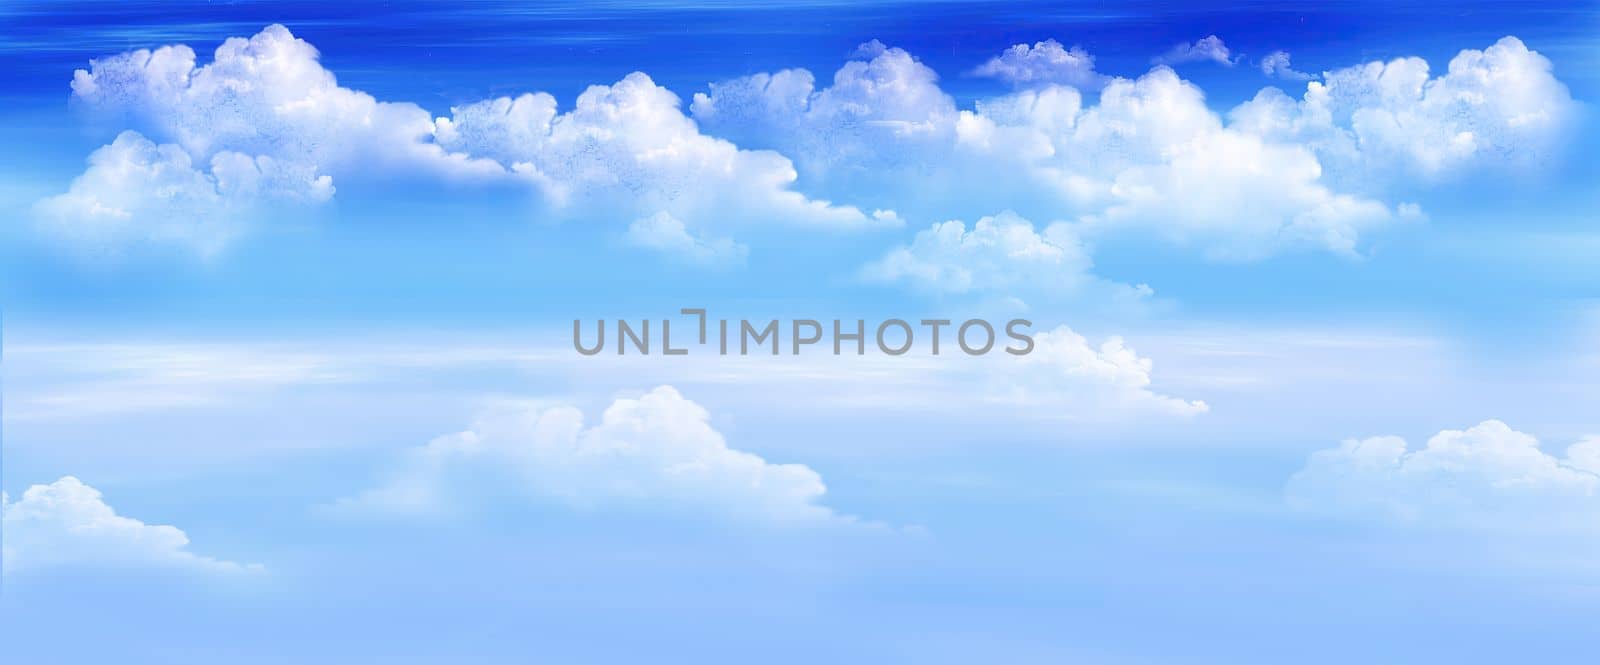 Clouds in a Blue Sky illustration by Multipedia